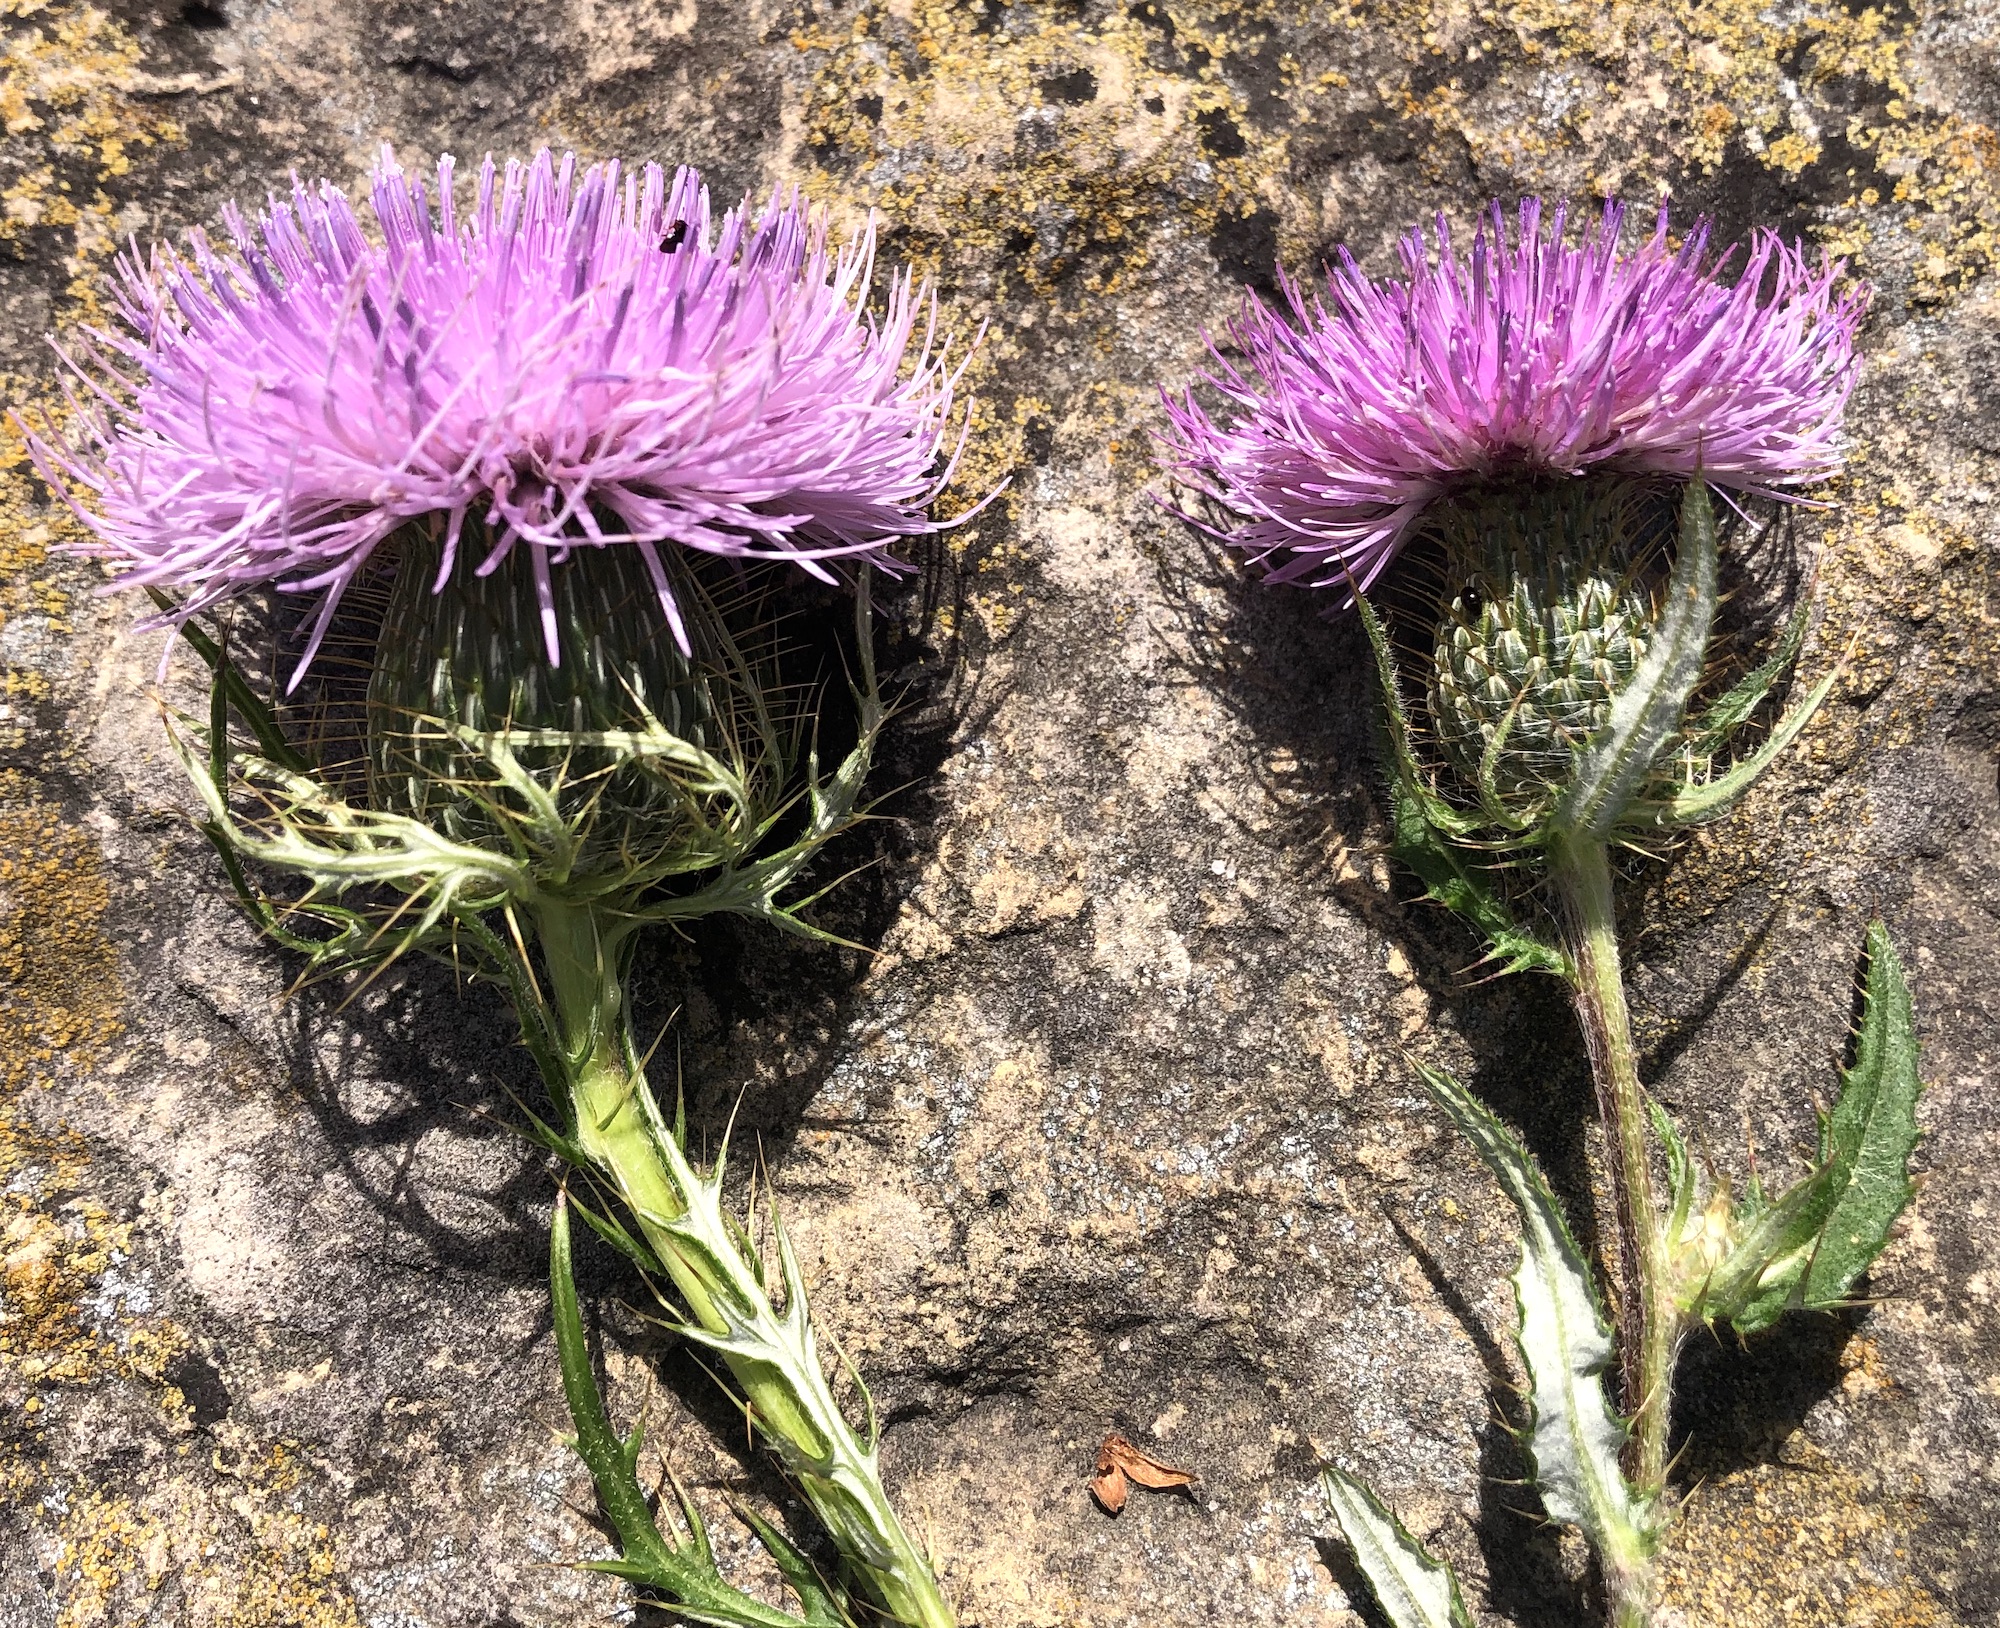 Comparison of Field thistle and Tall Thistle flower. Field Thistle flower on left and Tall Thistle blossom on right.